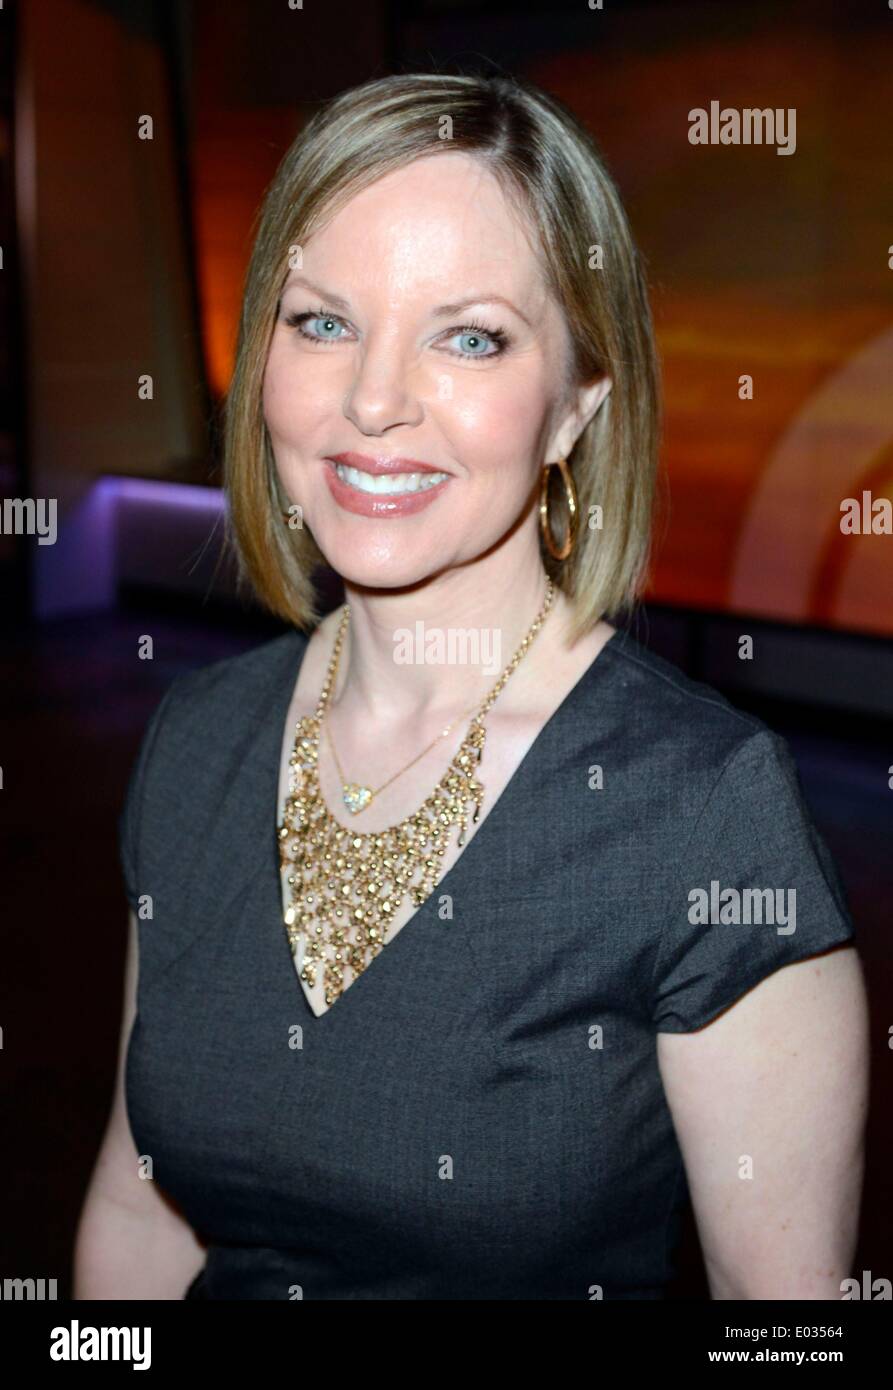 New York, NY, USA. 30th Apr, 2014. Melissa Sue Anderson at talk show appearance for LITTLE HOUSE ON THE PRAIRIE Cast Reunion at the NBC Today Show, Rockefeller Plaza, New York, NY April 30, 2014. Credit:  Derek Storm/Everett Collection/Alamy Live News Stock Photo